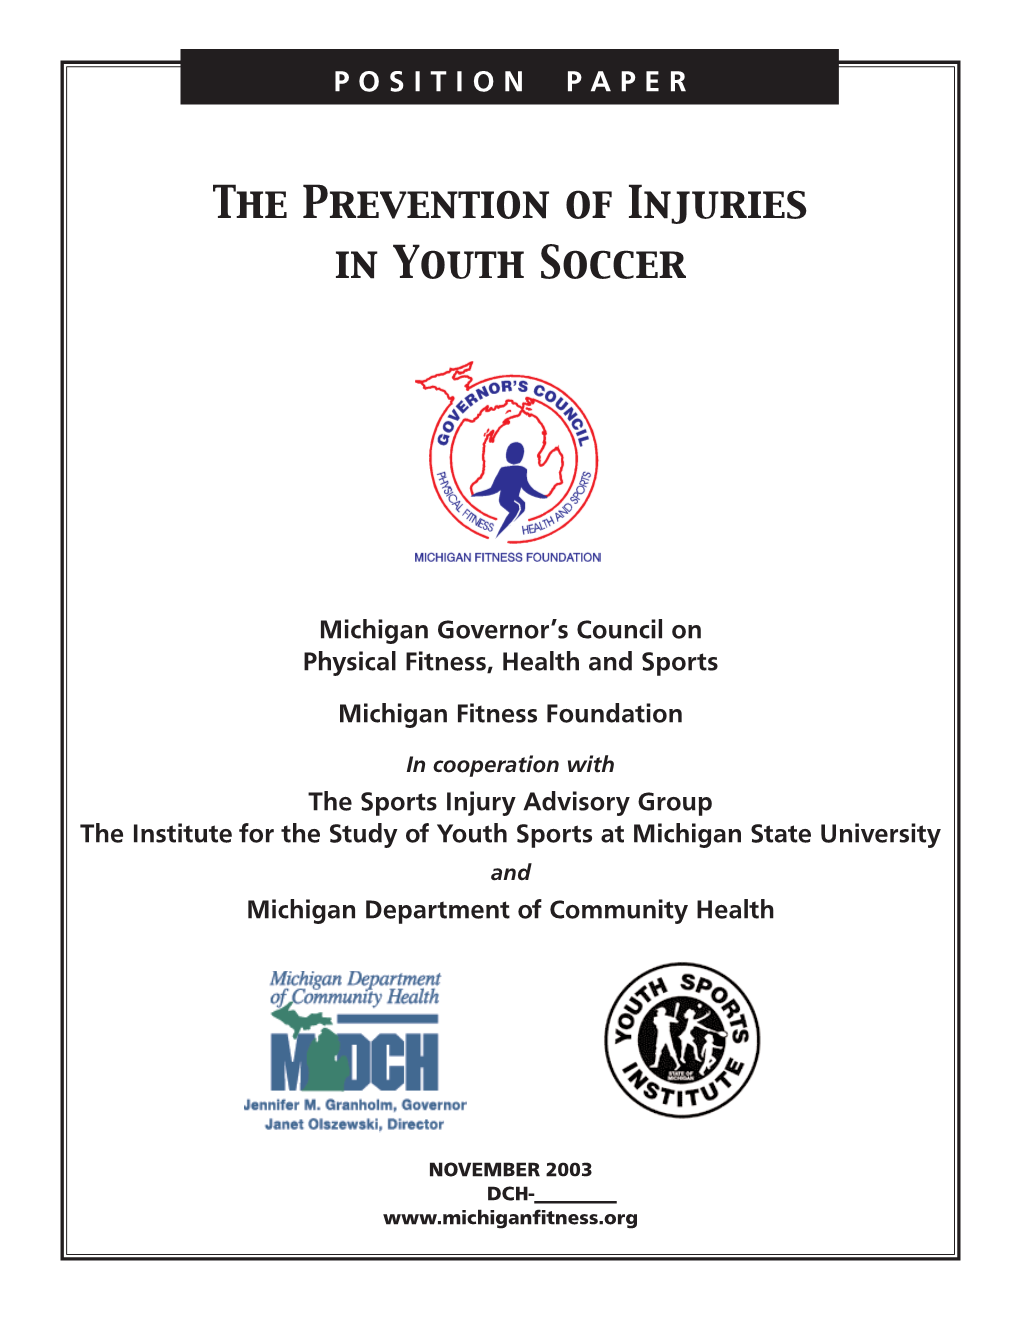 The Prevention of Injuries in Youth Soccer